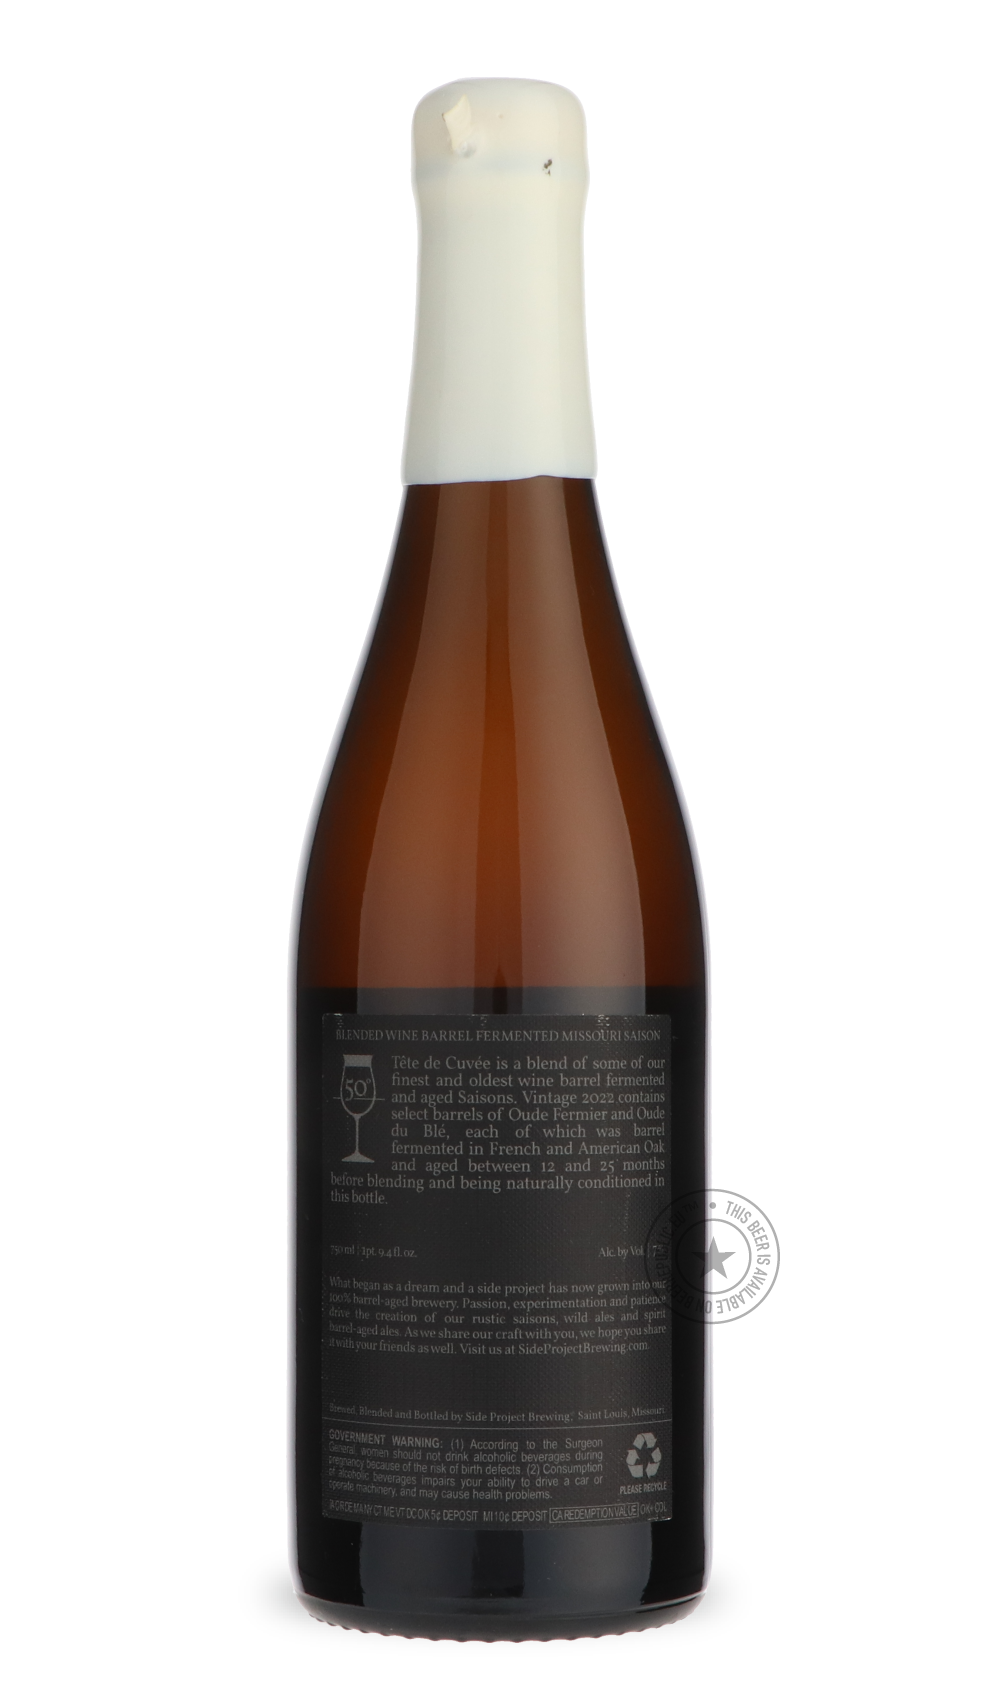 -Side Project- Tête de Cuvée Vintage 2022-Sour / Wild & Fruity- Only @ Beer Republic - The best online beer store for American & Canadian craft beer - Buy beer online from the USA and Canada - Bier online kopen - Amerikaans bier kopen - Craft beer store - Craft beer kopen - Amerikanisch bier kaufen - Bier online kaufen - Acheter biere online - IPA - Stout - Porter - New England IPA - Hazy IPA - Imperial Stout - Barrel Aged - Barrel Aged Imperial Stout - Brown - Dark beer - Blond - Blonde - Pilsner - Lager -